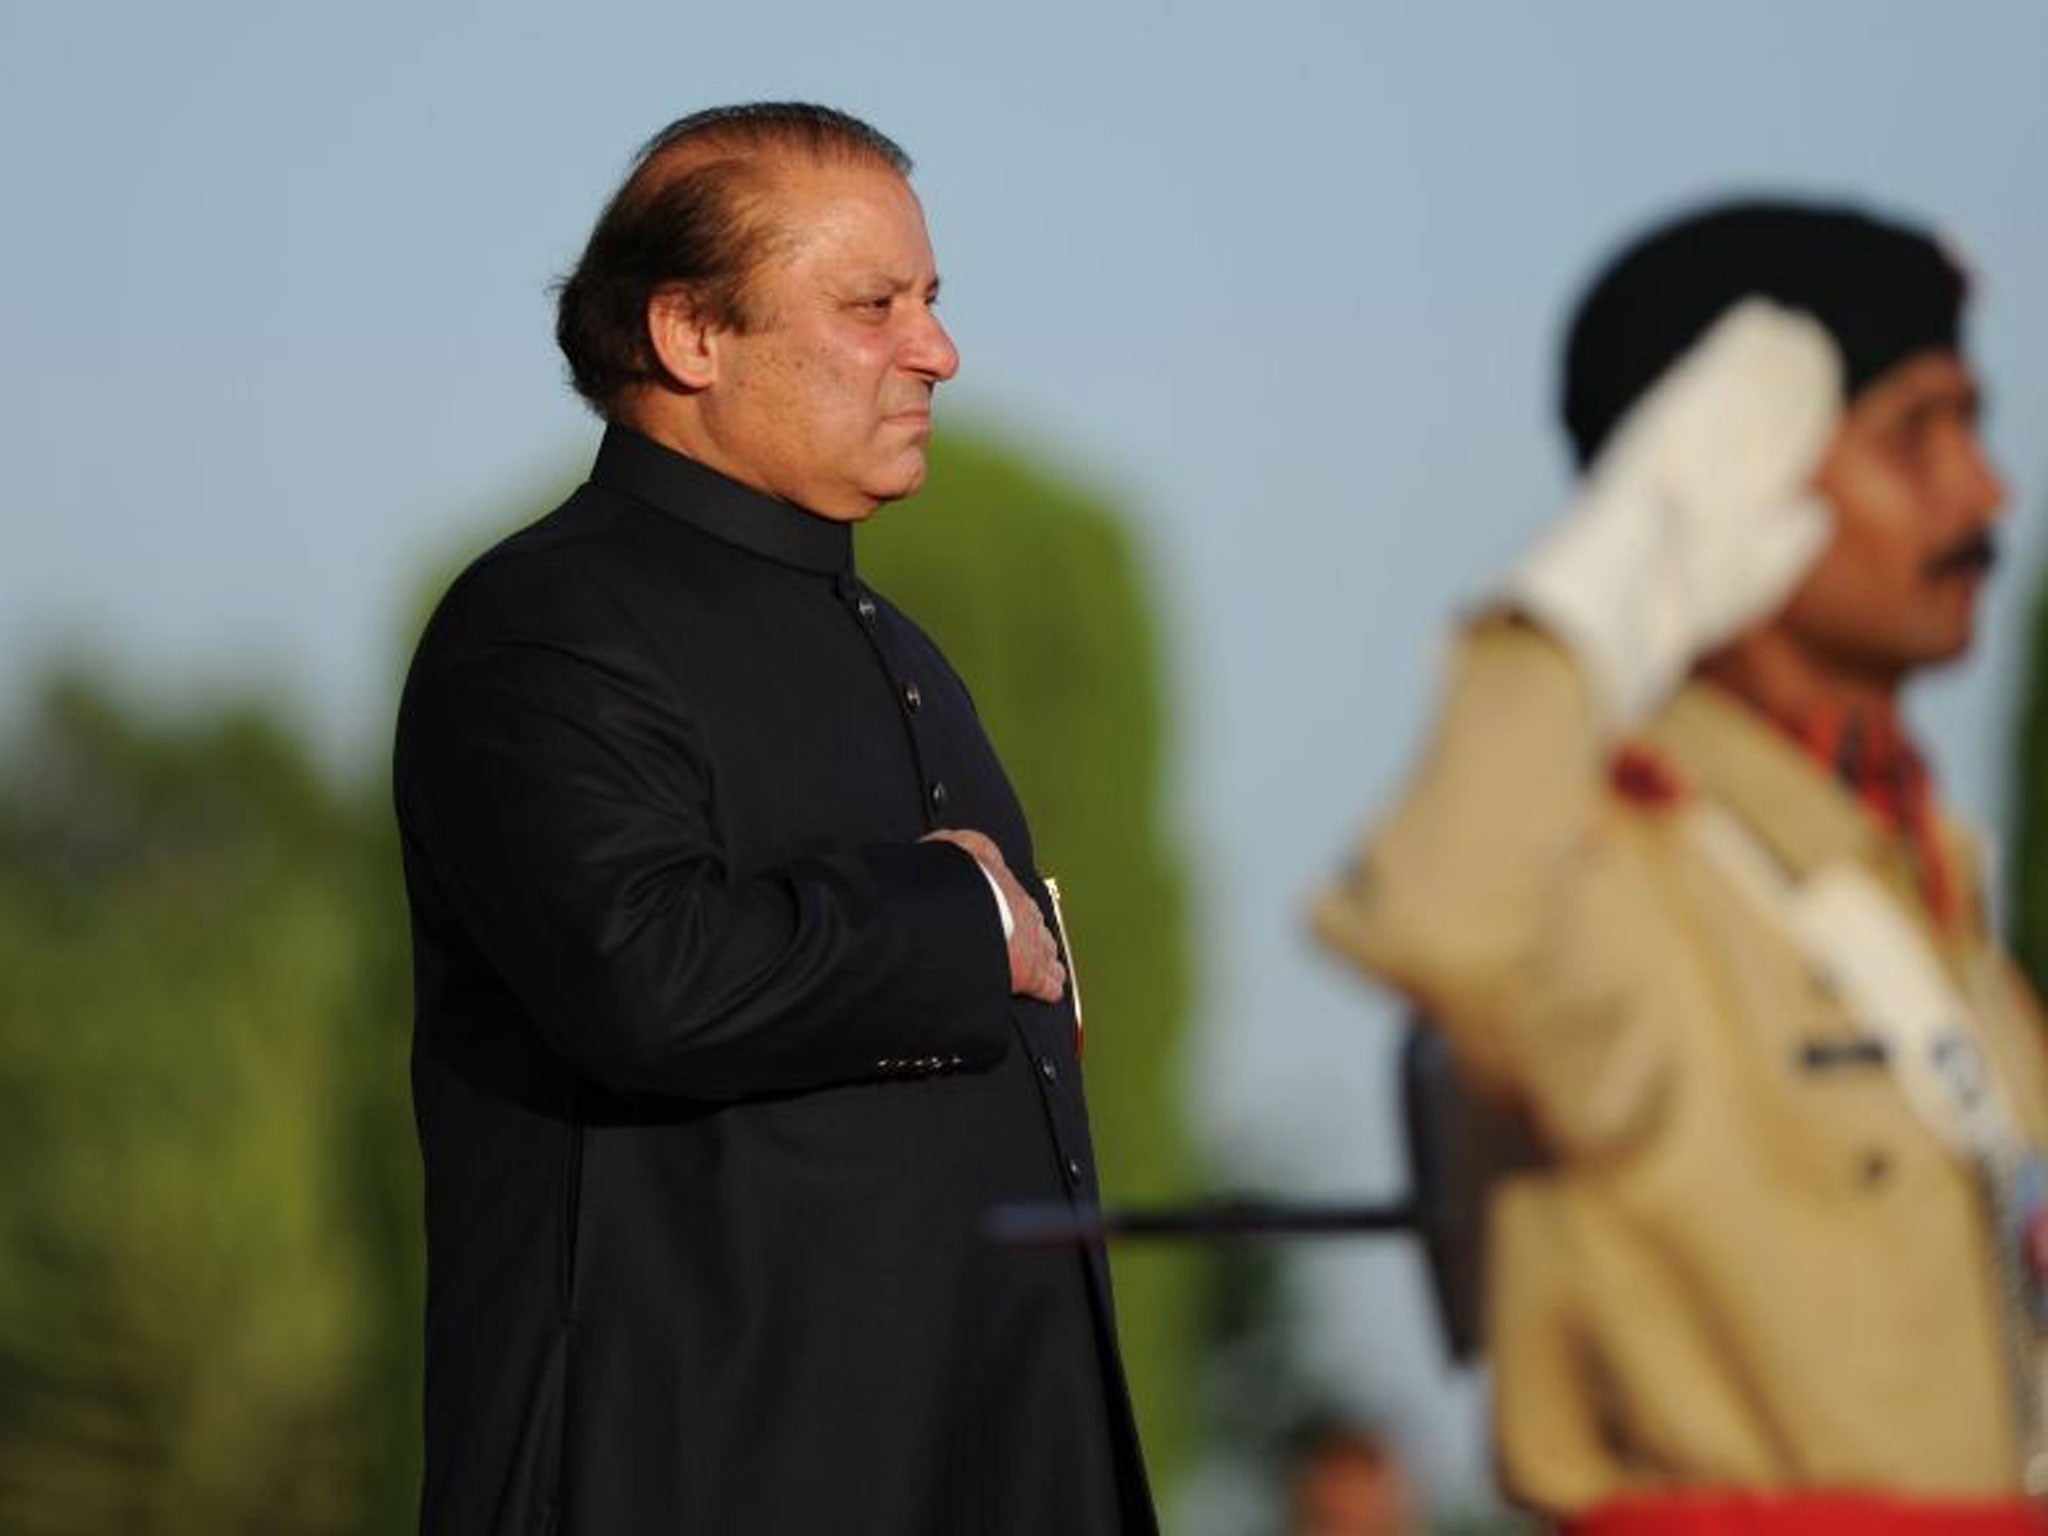 Pakistani Prime Minister Nawaz Sharif has said the death of Major General Sanaullah Khan will not affect the army's ongoing fight against the Taliban